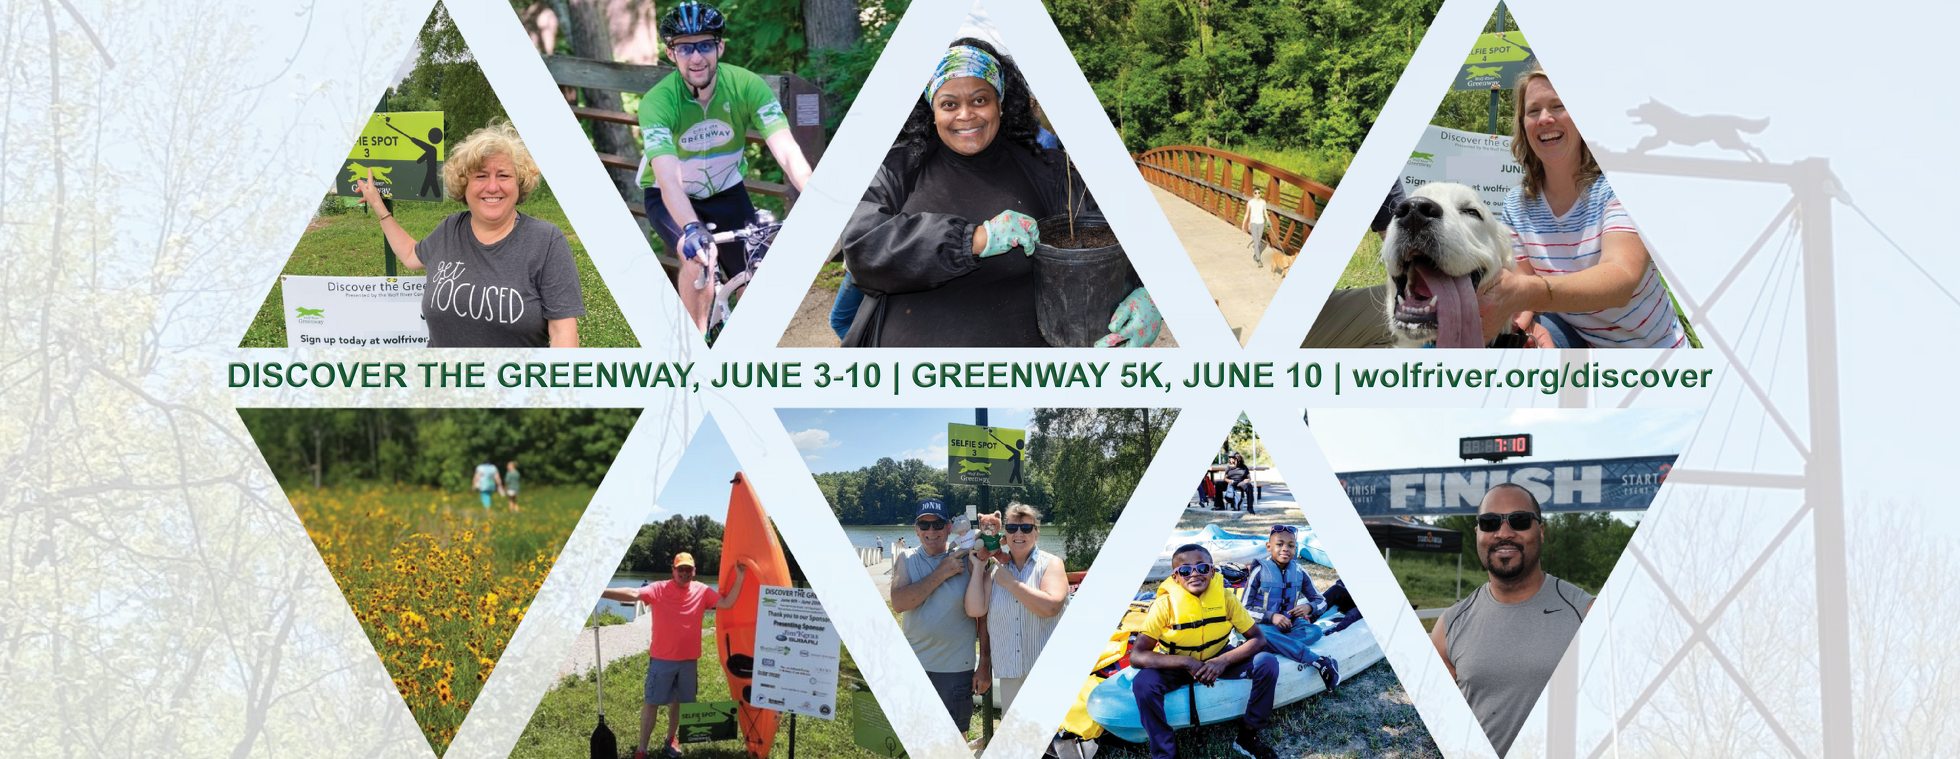 Discover the Greenway